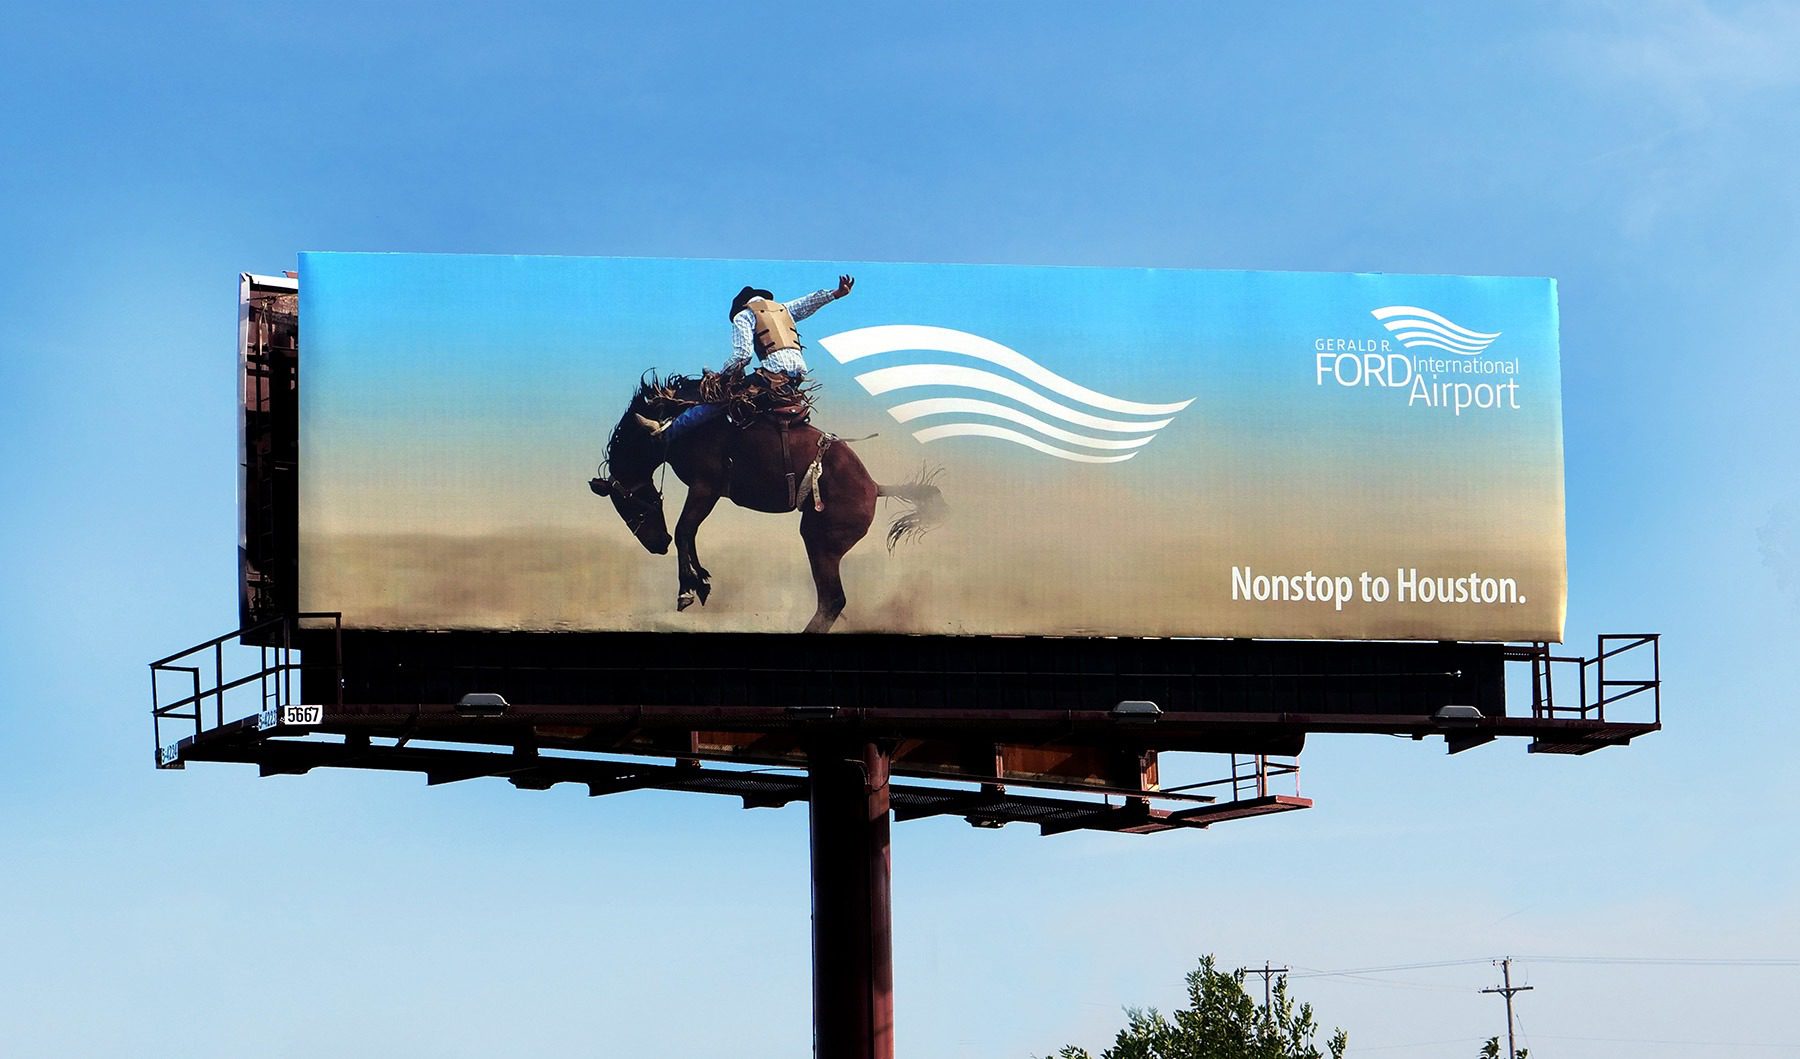 Out of home brand campaign for Gerald R. Ford International Airport. Nonstop to Houston